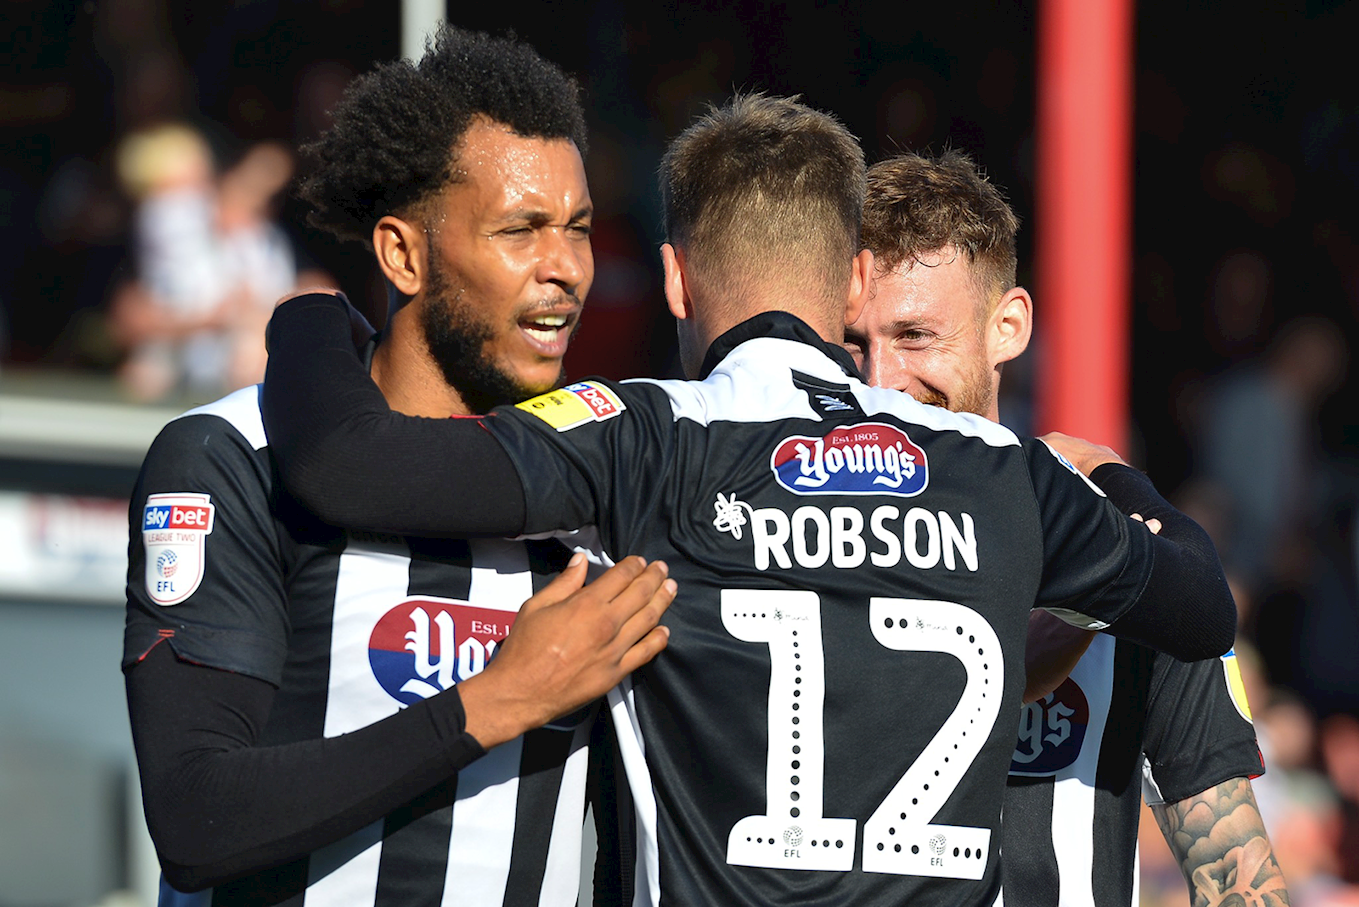 Grimsby town players celebrating a goal